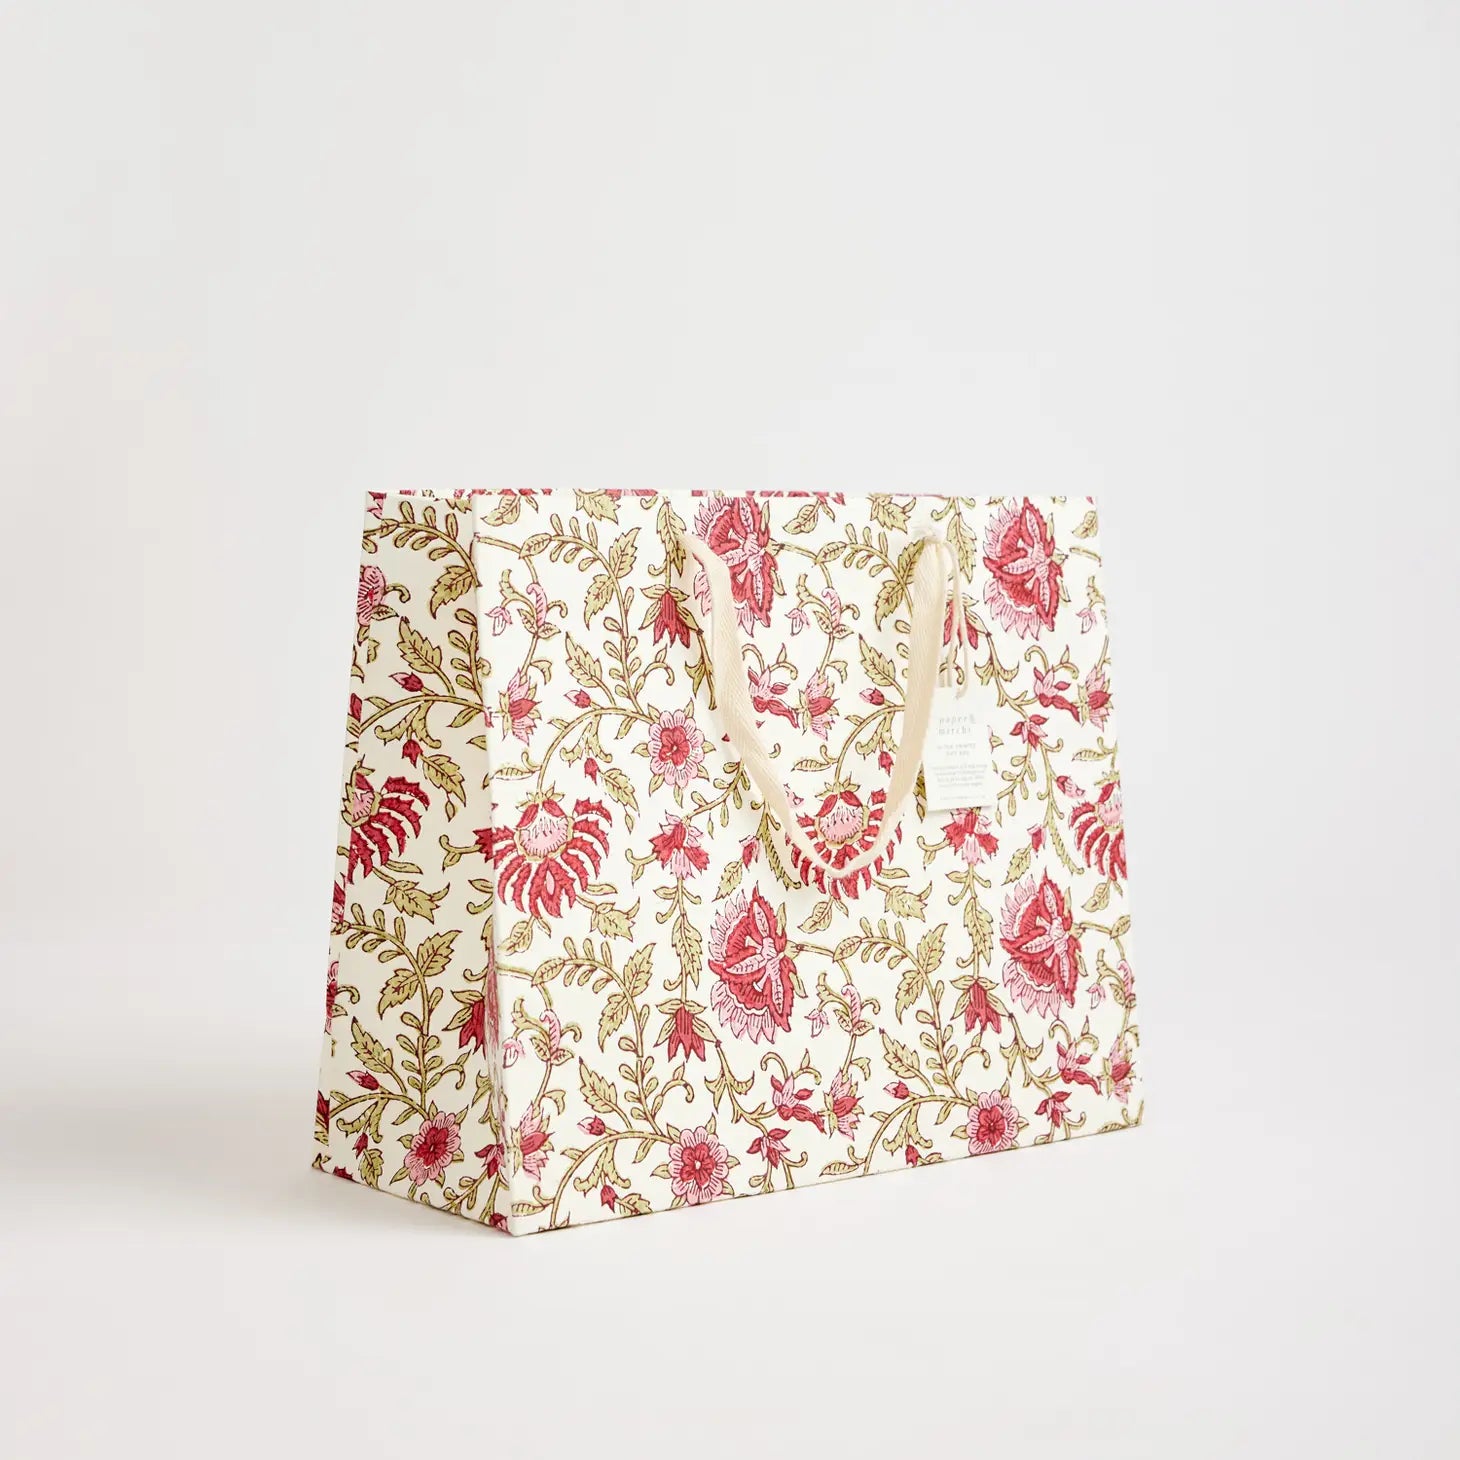 Hand Block Printed Gift Bags - Flora Festive Mix